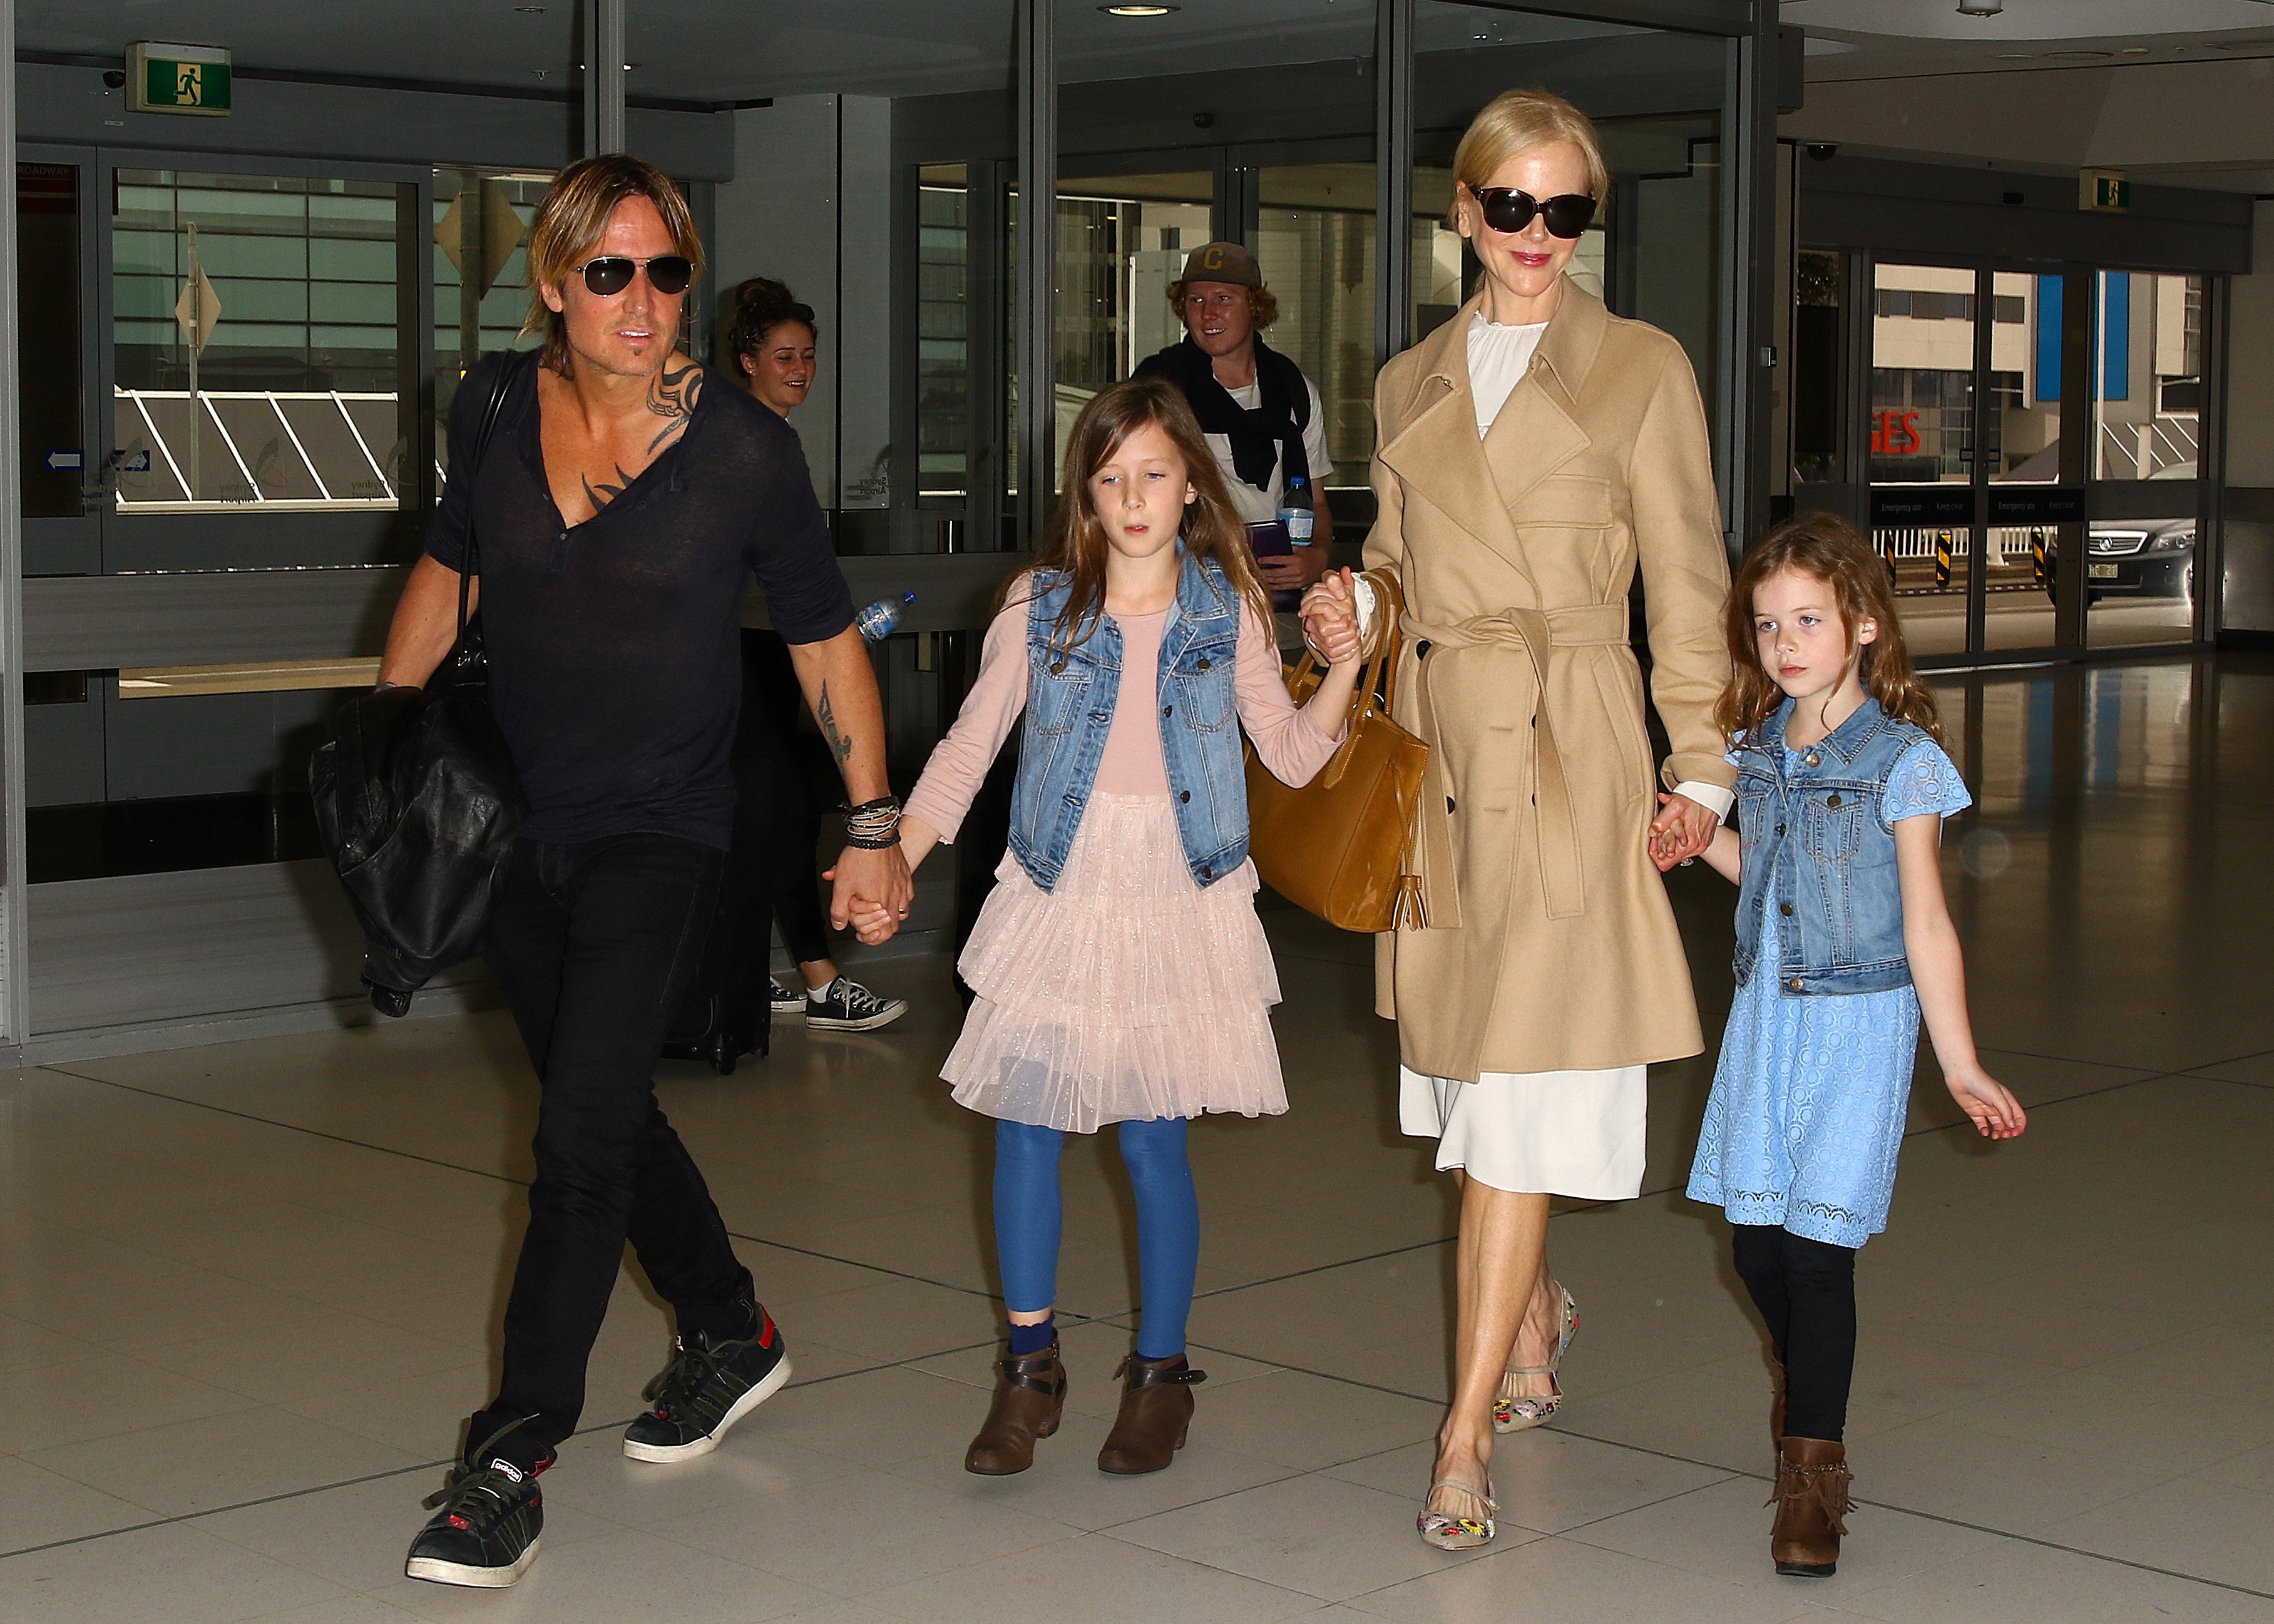 Nicole Kidman and Keith Urban arrive at Sydney airport with their daughters Faith Margaret and Sunday Rose on March 28, 2017 in Sydney, Australia. | Source: Getty Images